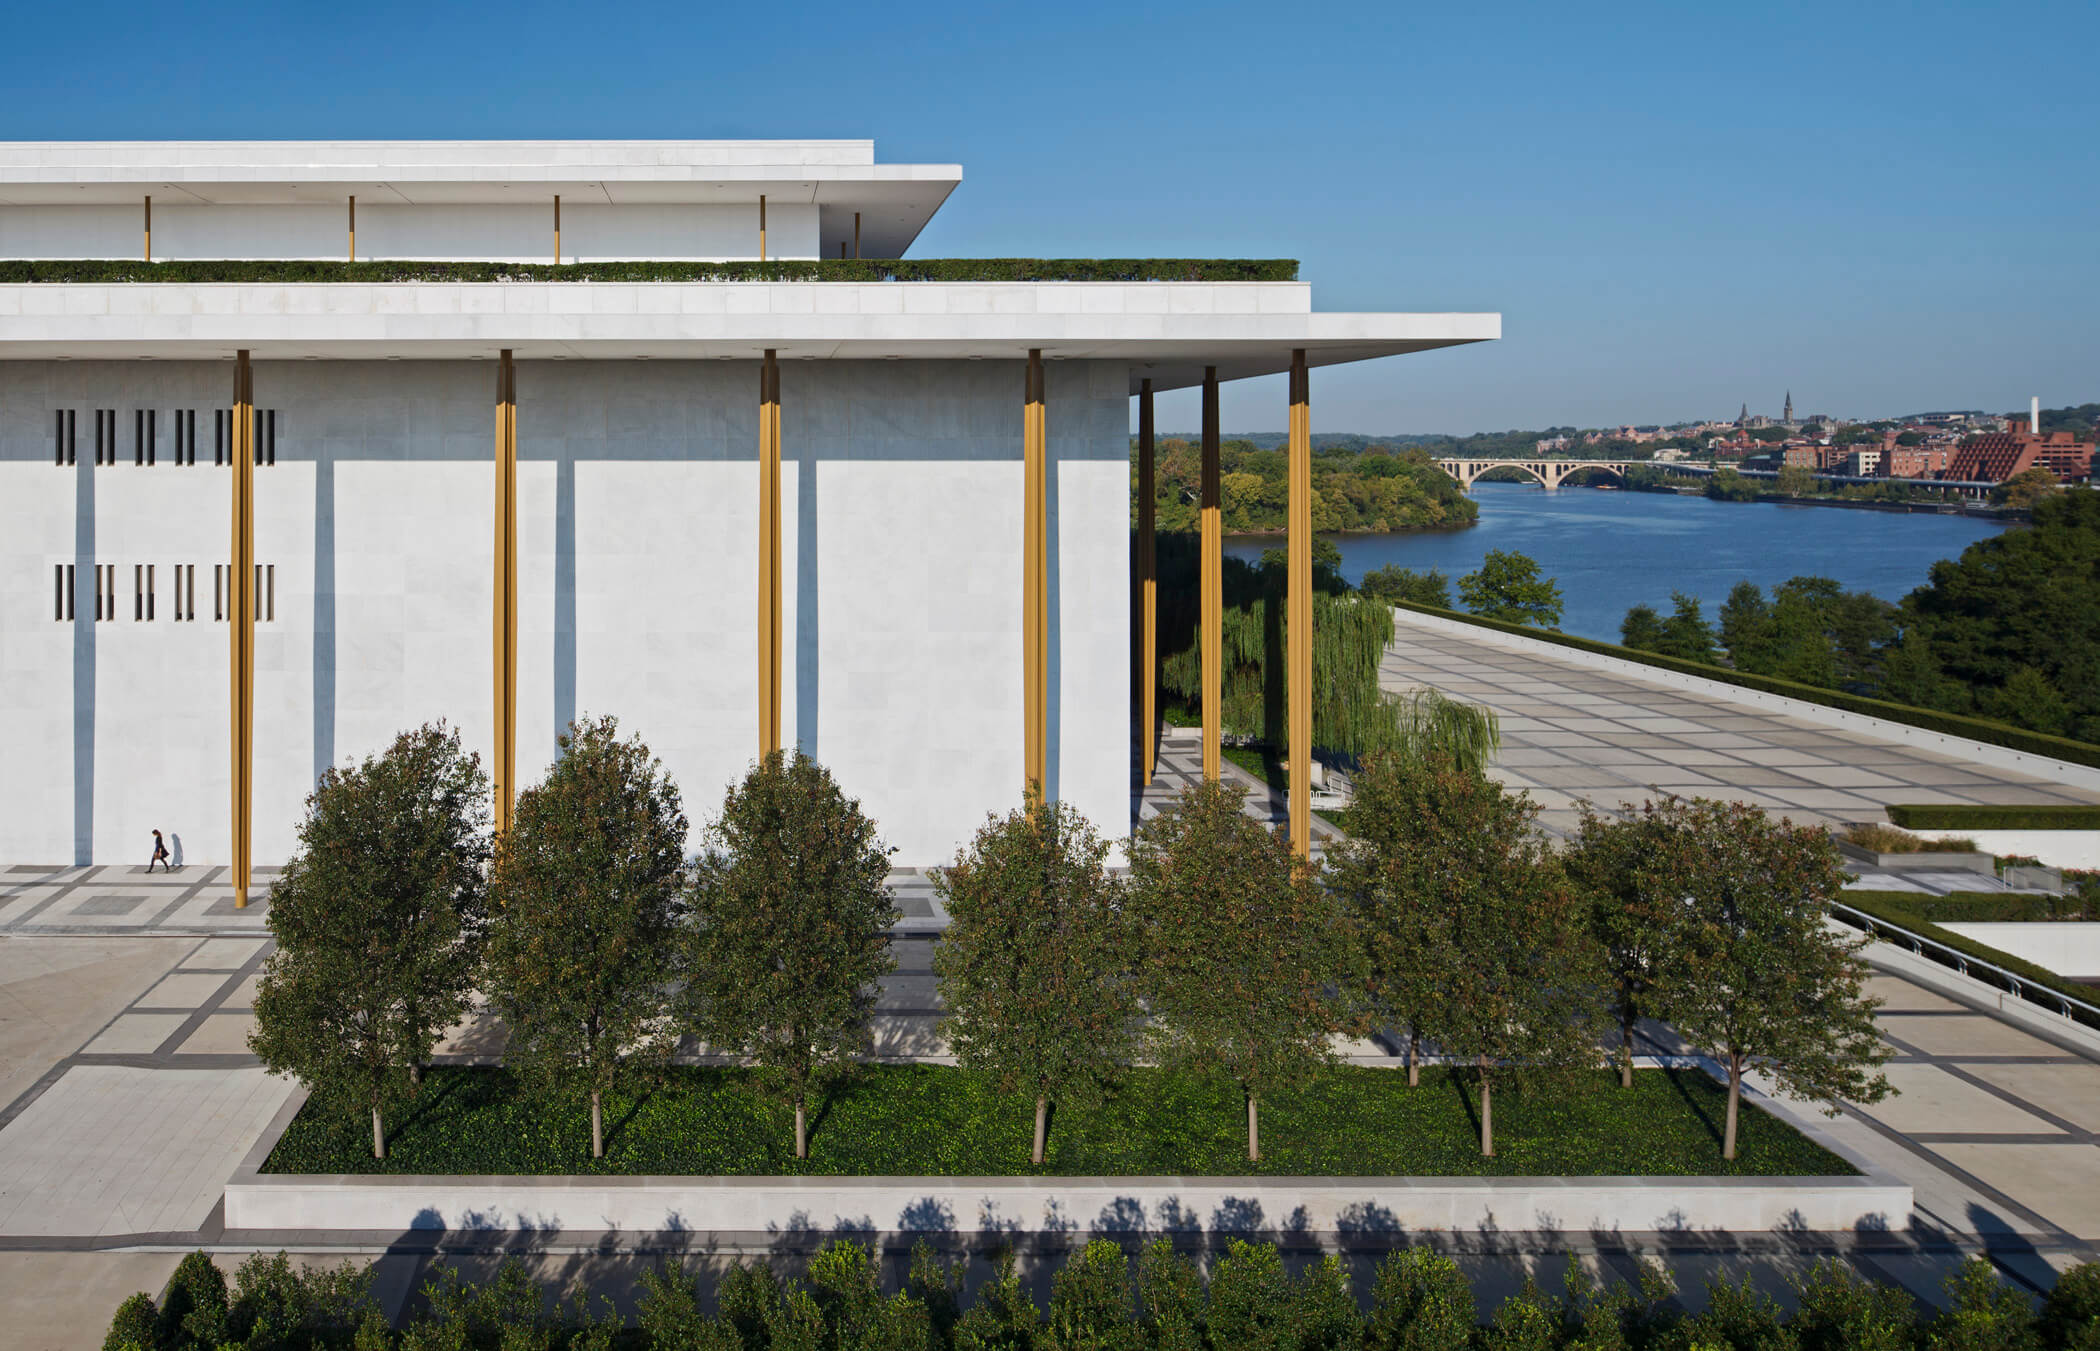 John F. Kennedy Center for the Performing Arts of Washington